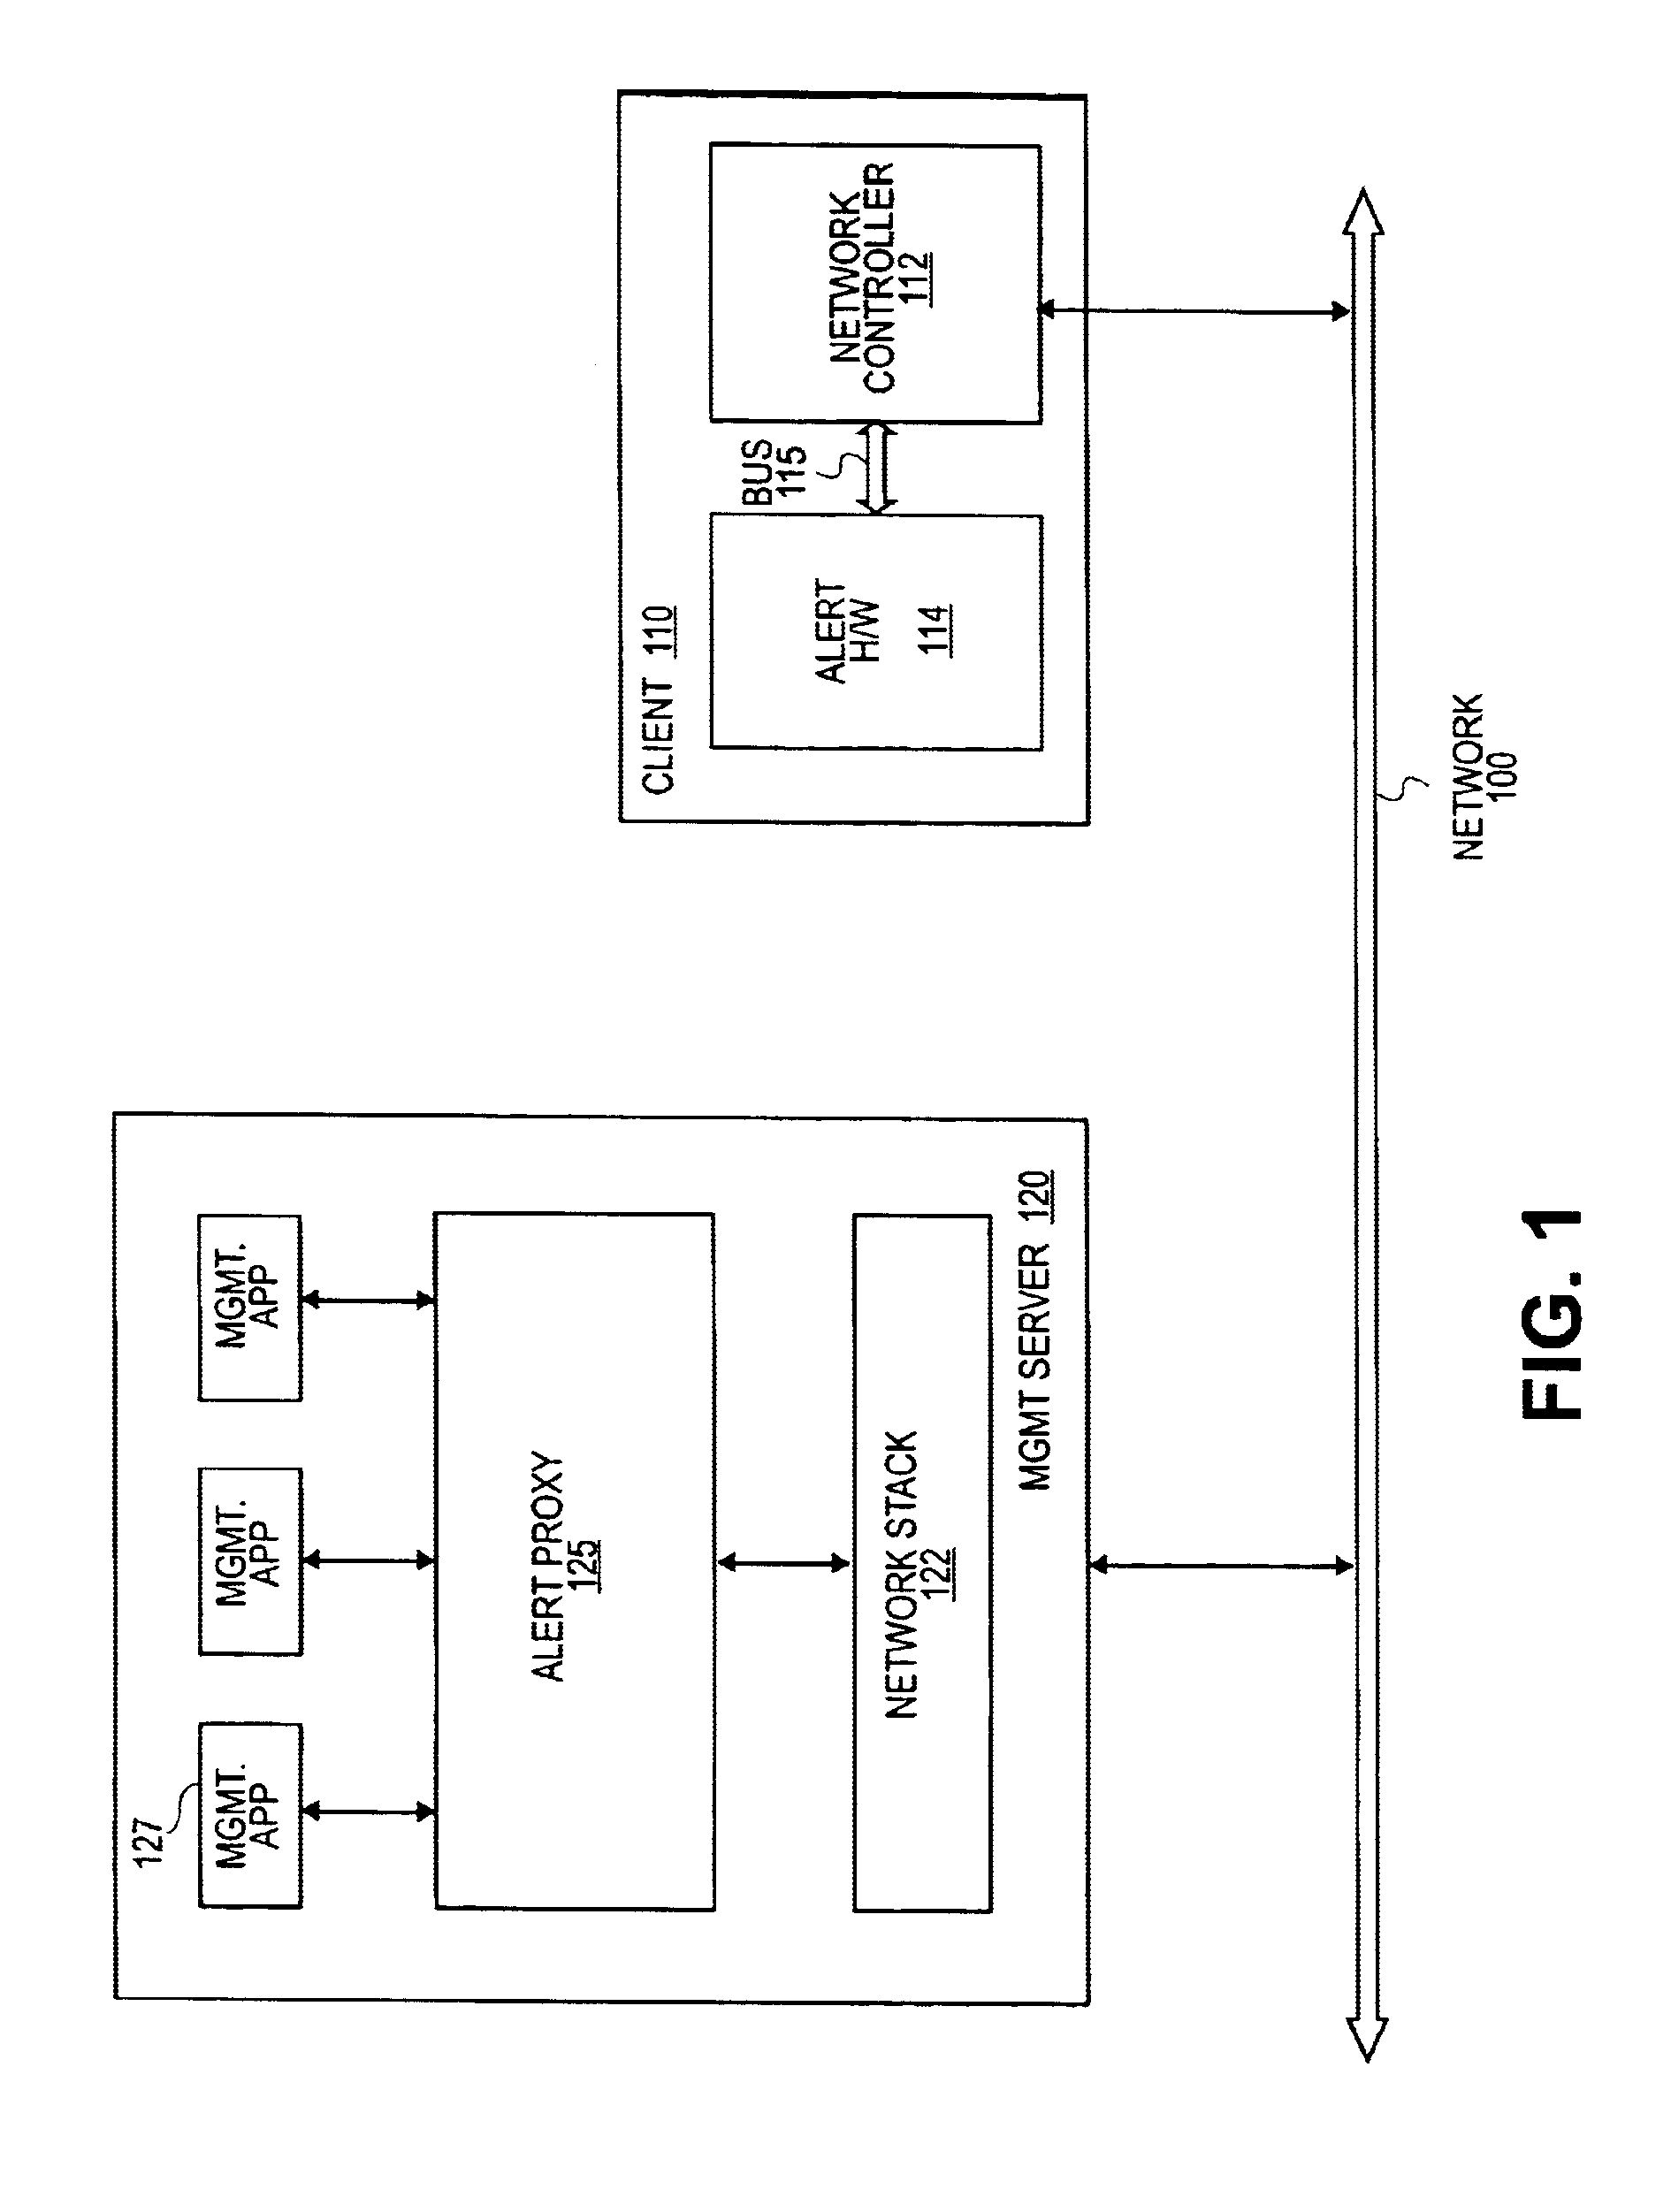 Method and apparatus for dynamic network configuration of an alert-based client